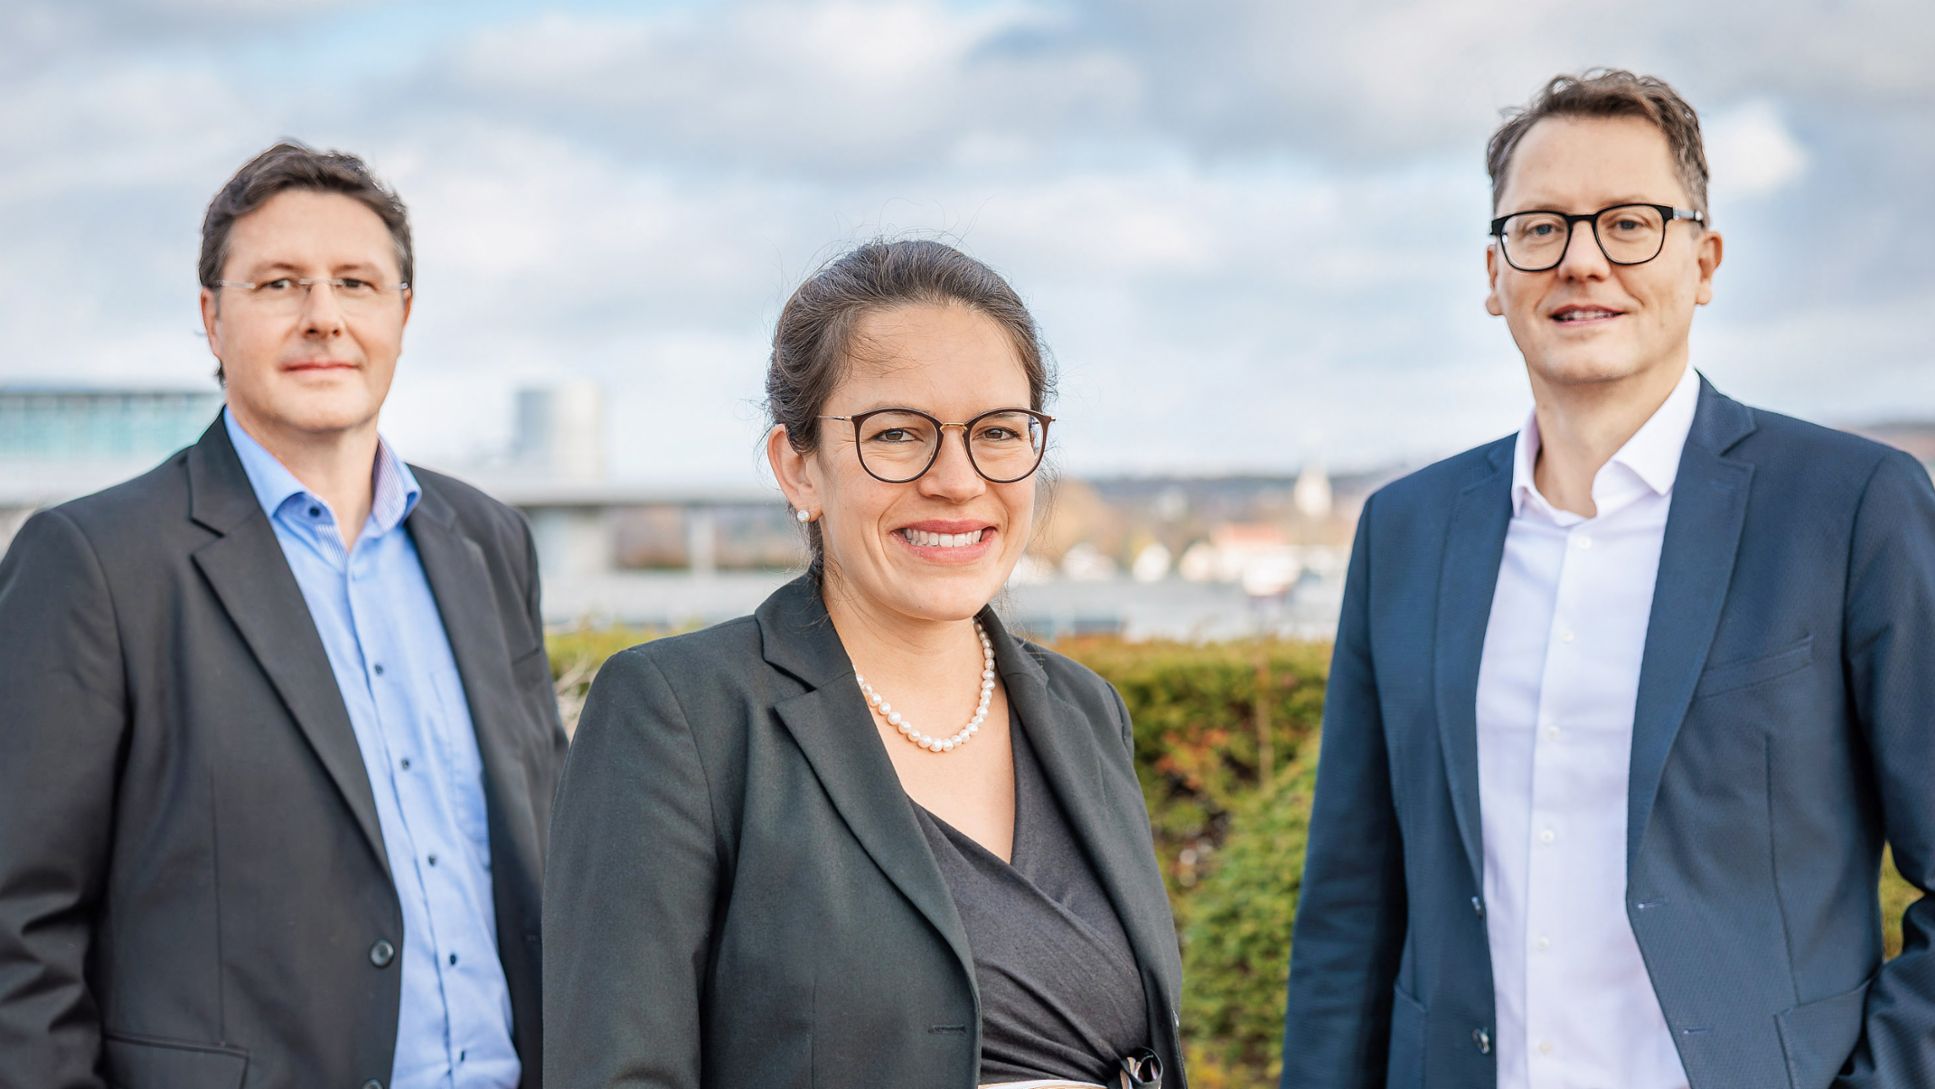 Vice President Lars Murawski (right), Annette Eckes (Senior Manager Circular Economy), Ingo Weiss (Head of Global Environment & Sustainability Management), 2023, Porsche Consulting